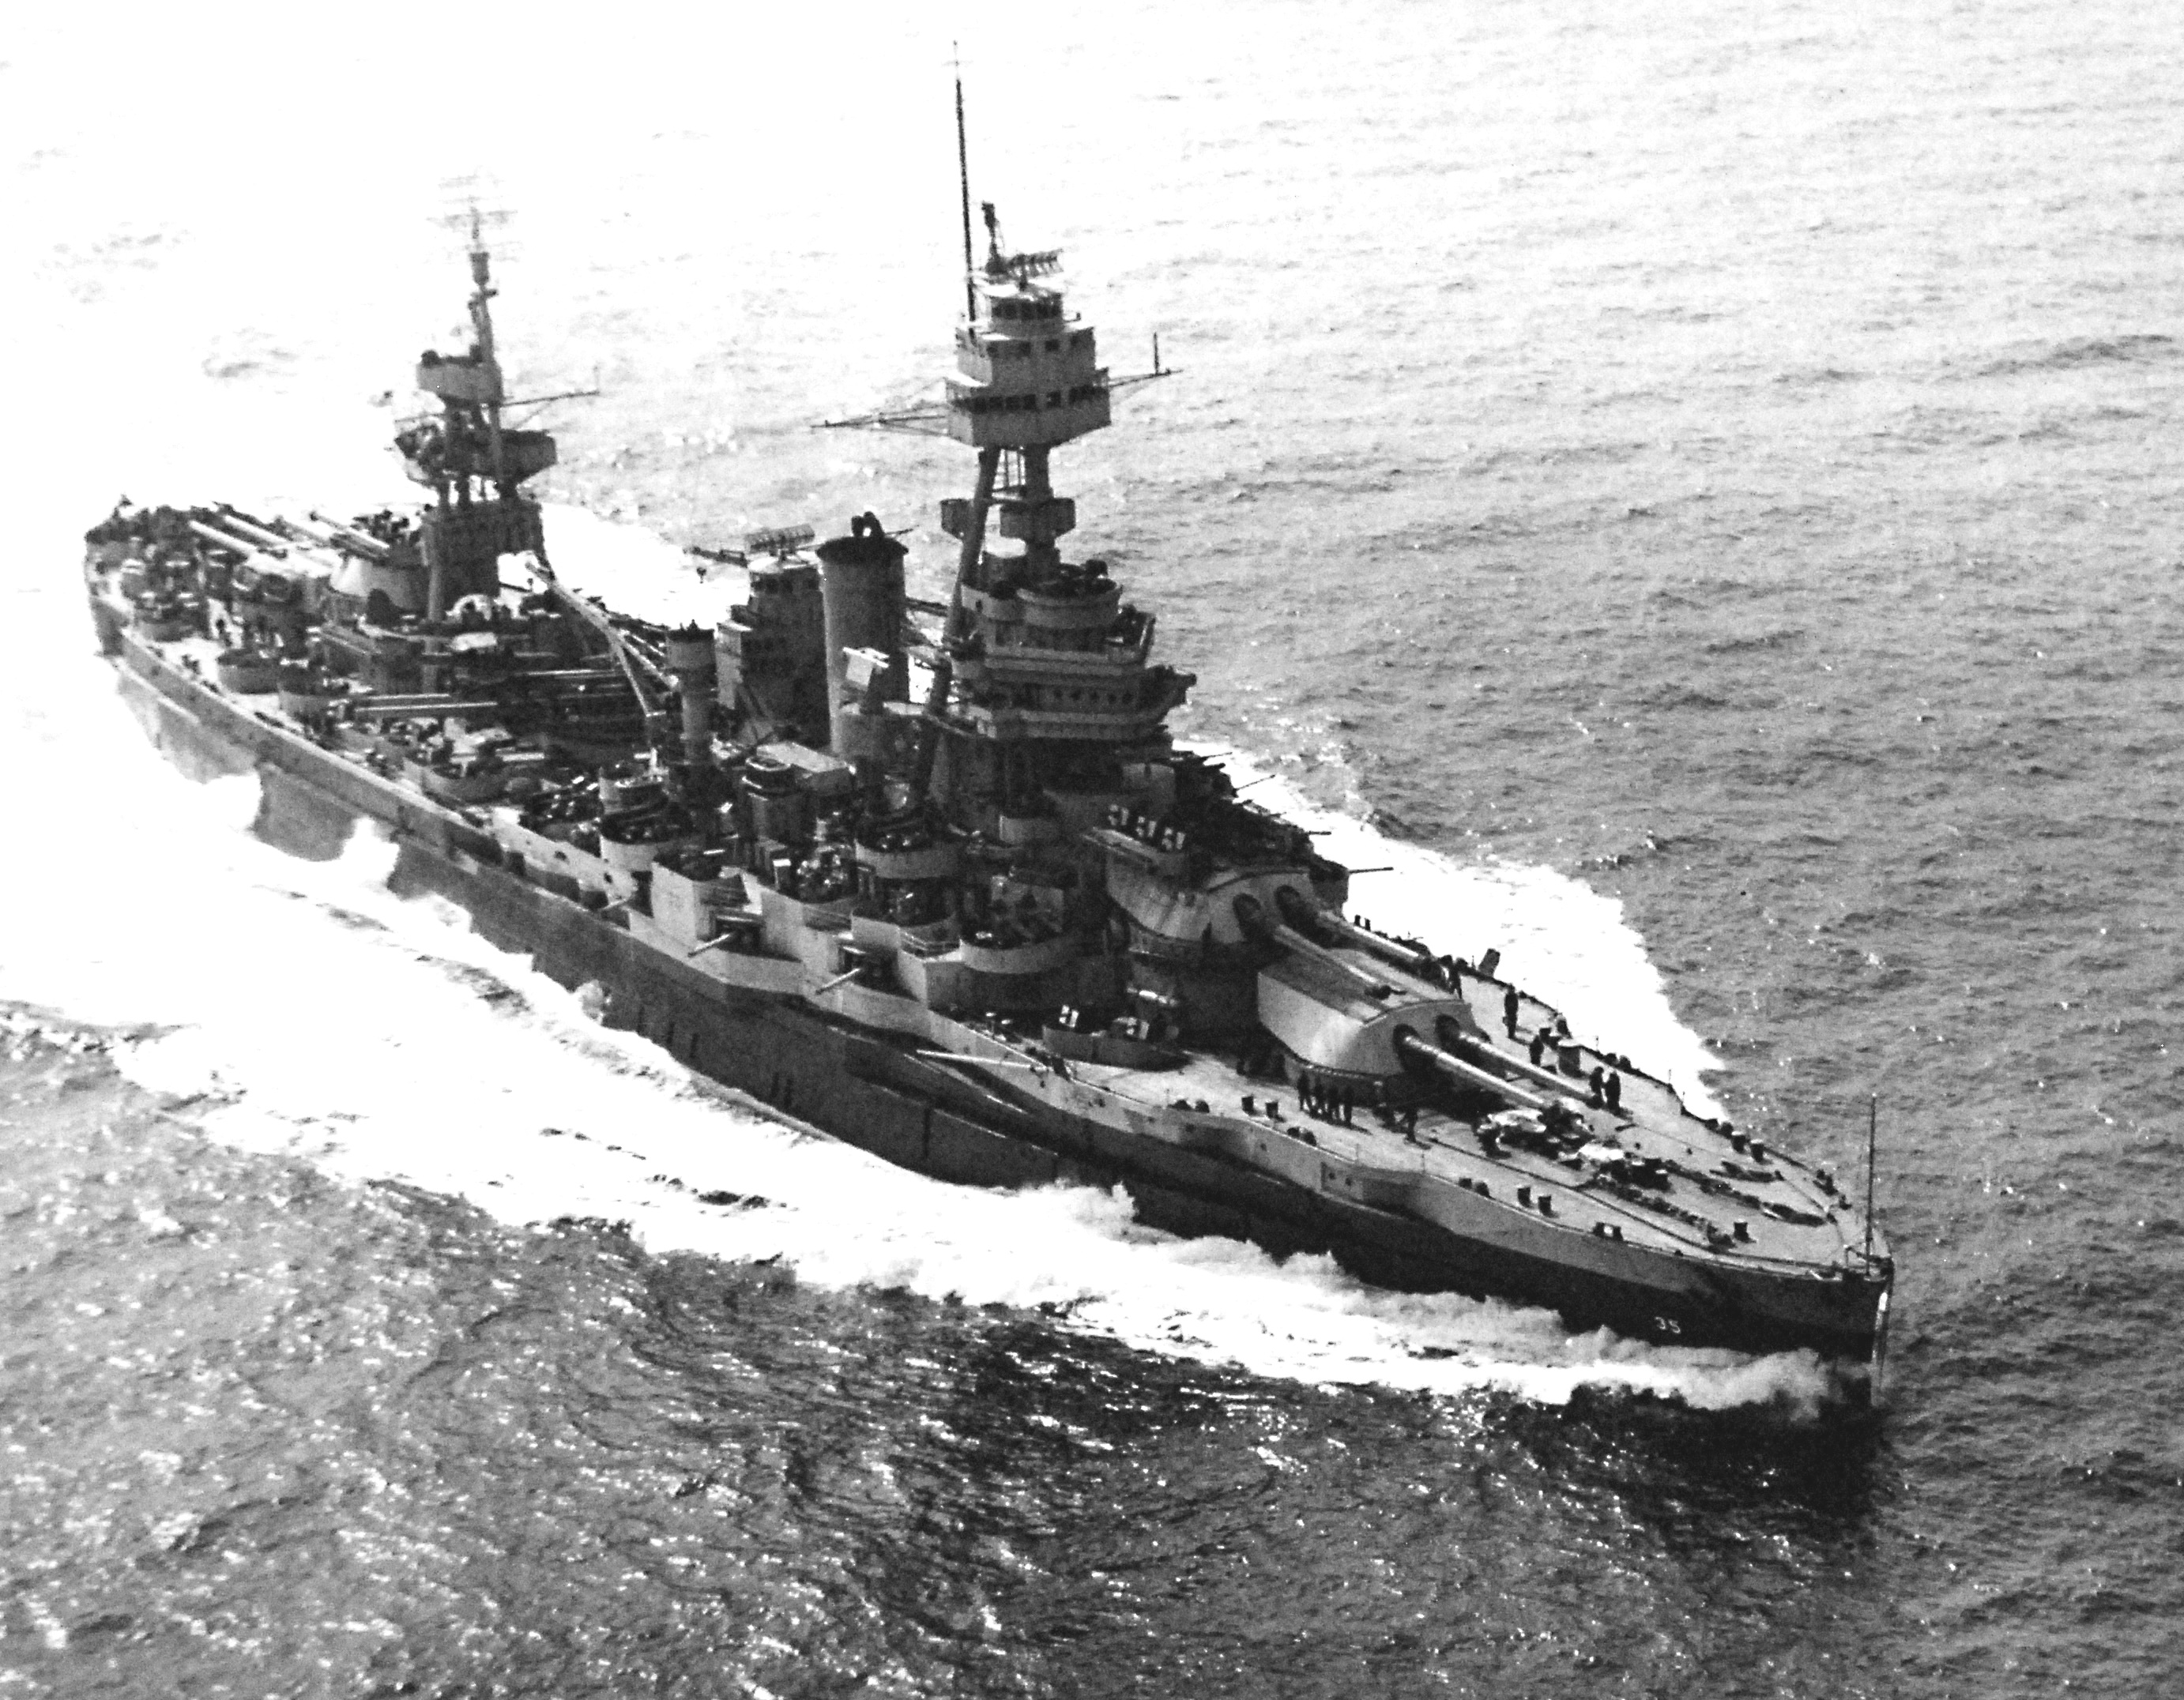 Battleship USS Texas in the Atlantic steaming from Casco Bay, Maine to New York, New York to assume duties in escorting convoys across the Atlantic, 1 Apr 1944.